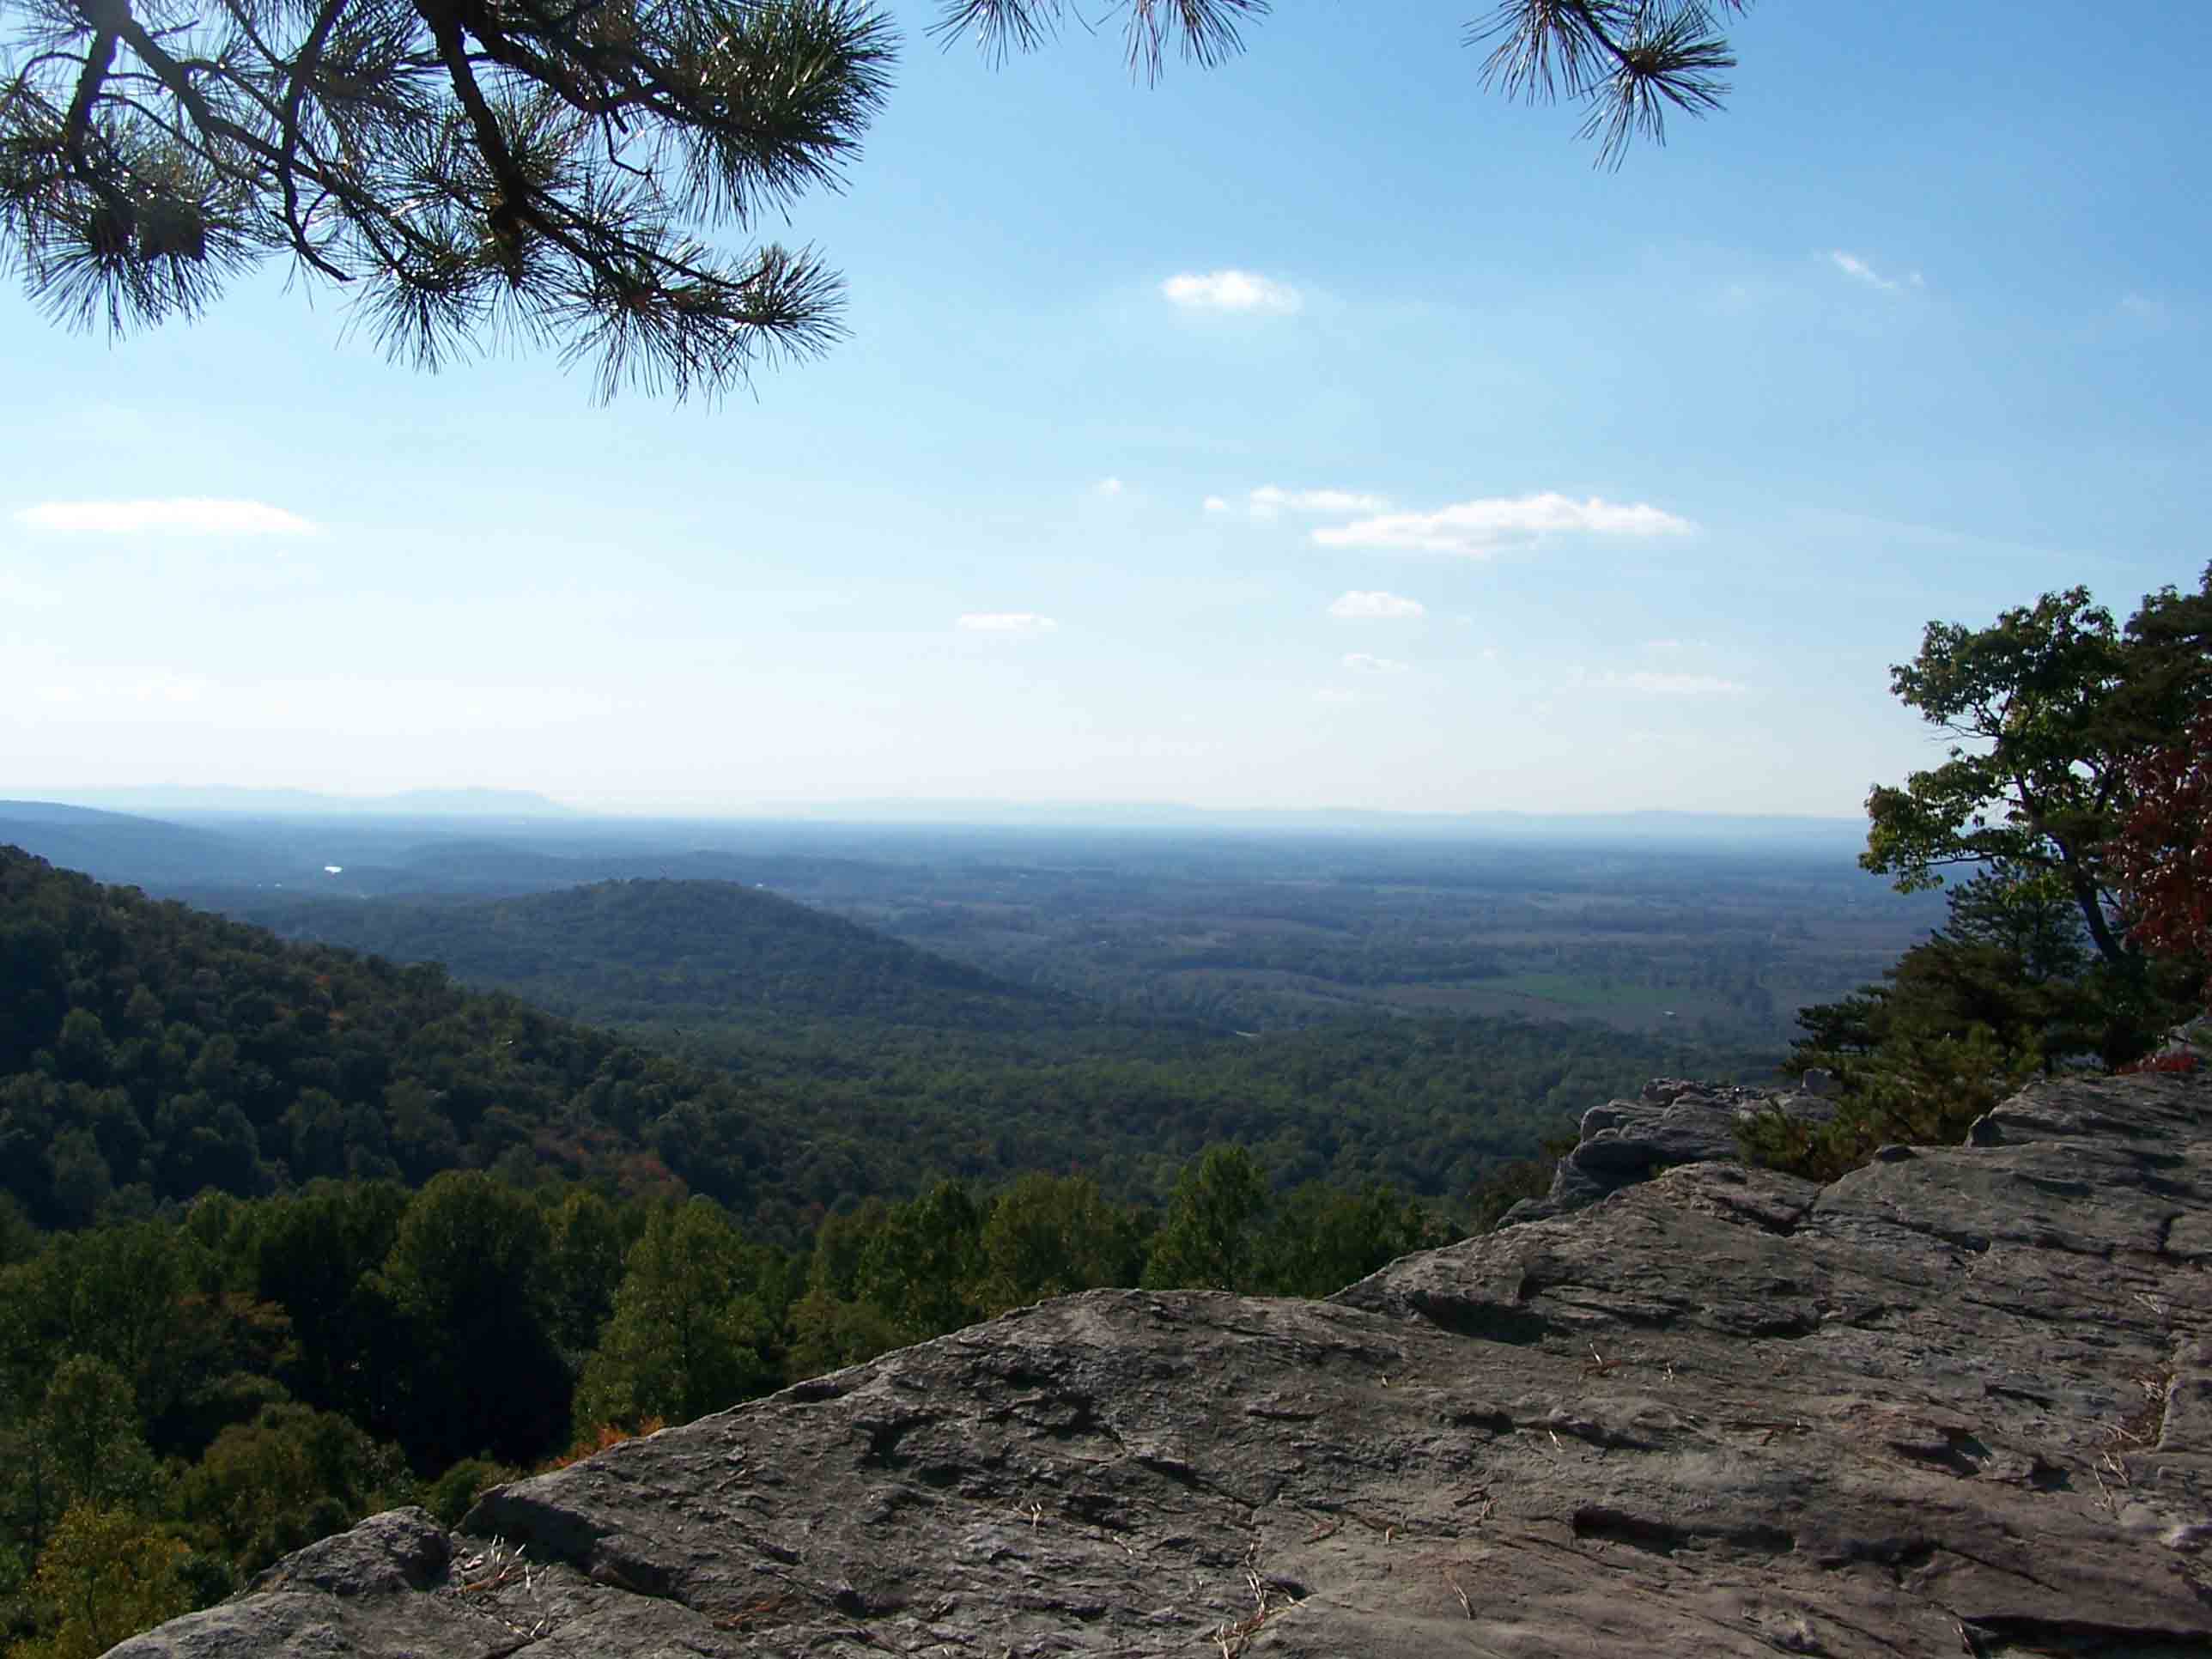 mm 10.9 - View from Crescent Rock. Courtesy at@rohland.org